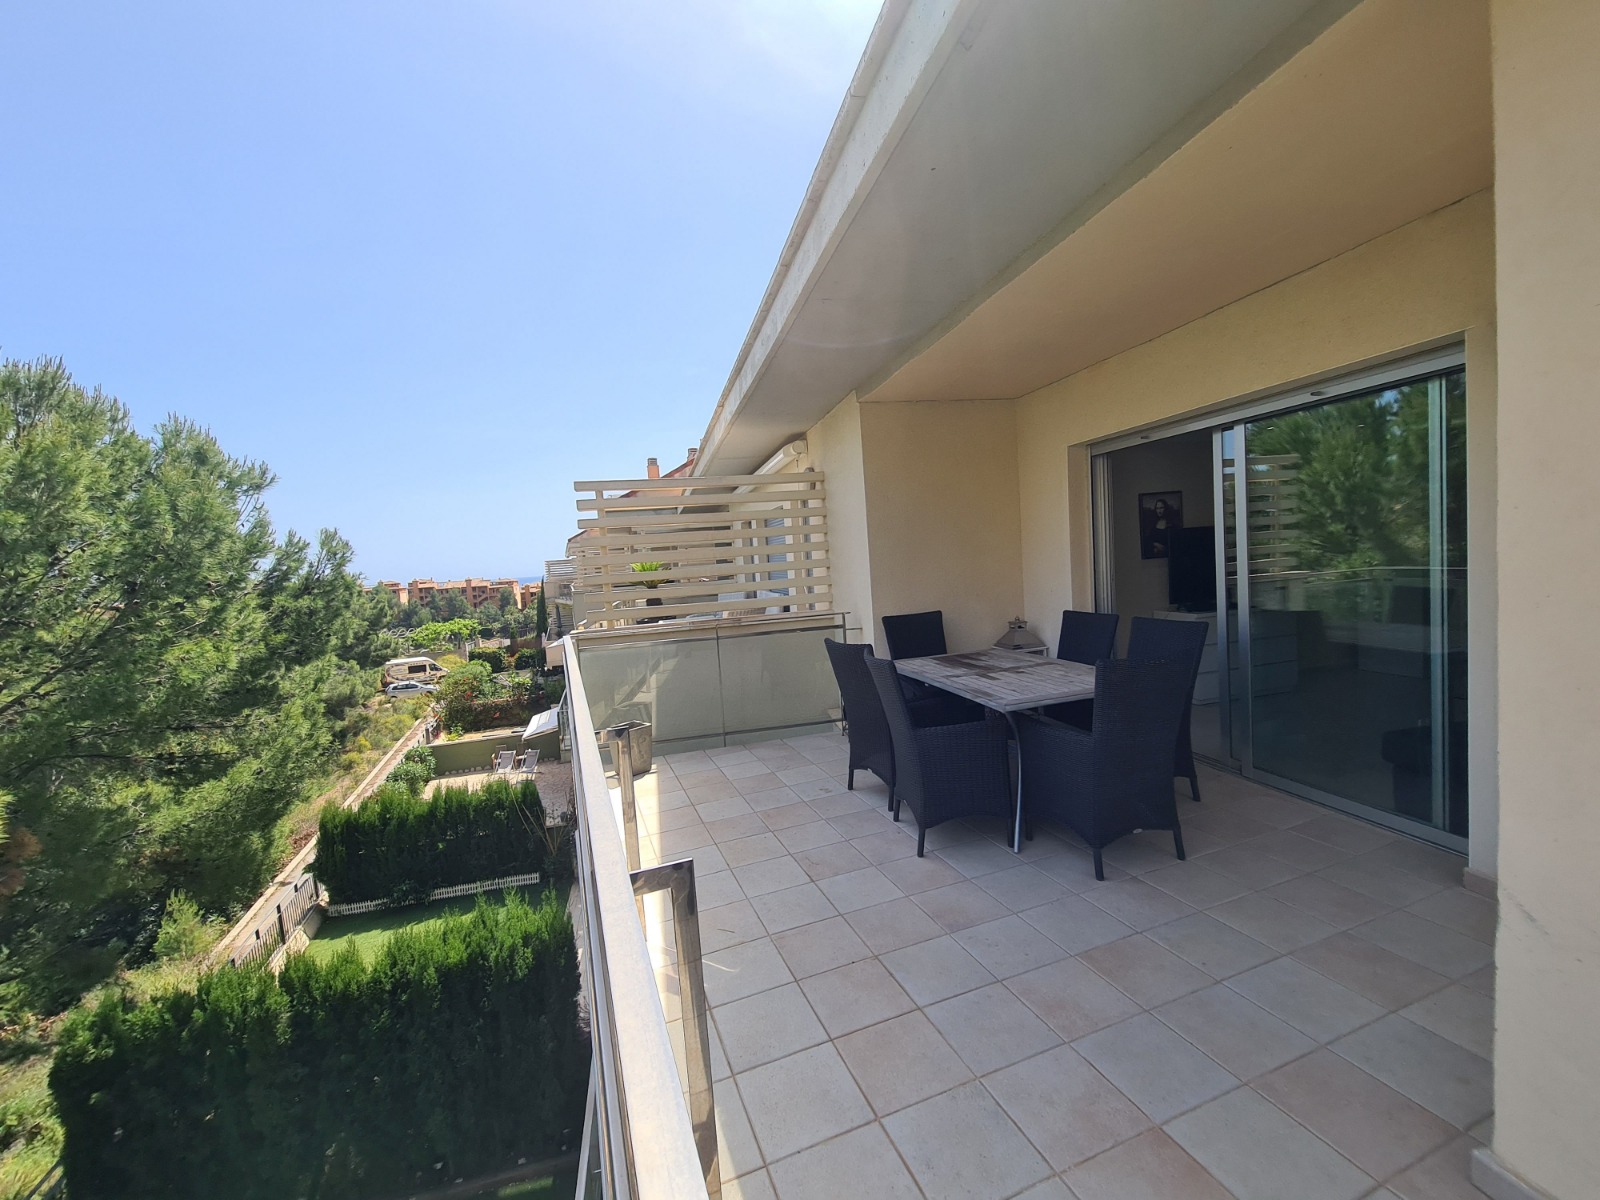 Fantastic renovated apartment with big terras and nice view